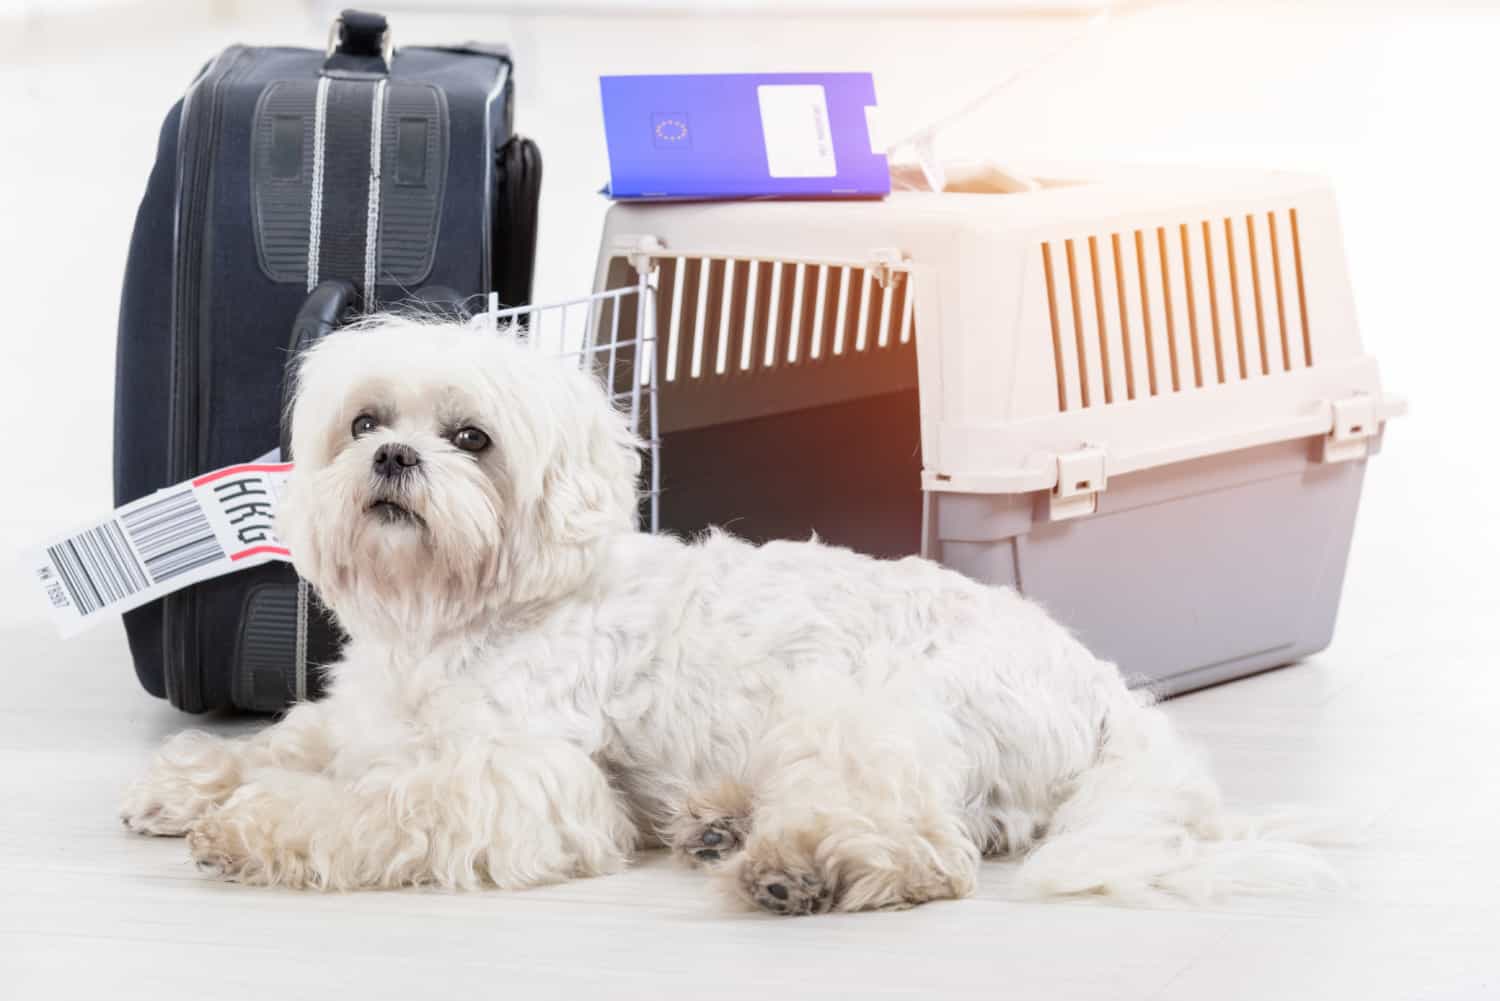 Fluffy white dog waiting at the airport with an airline pet carrier and luggage in the background